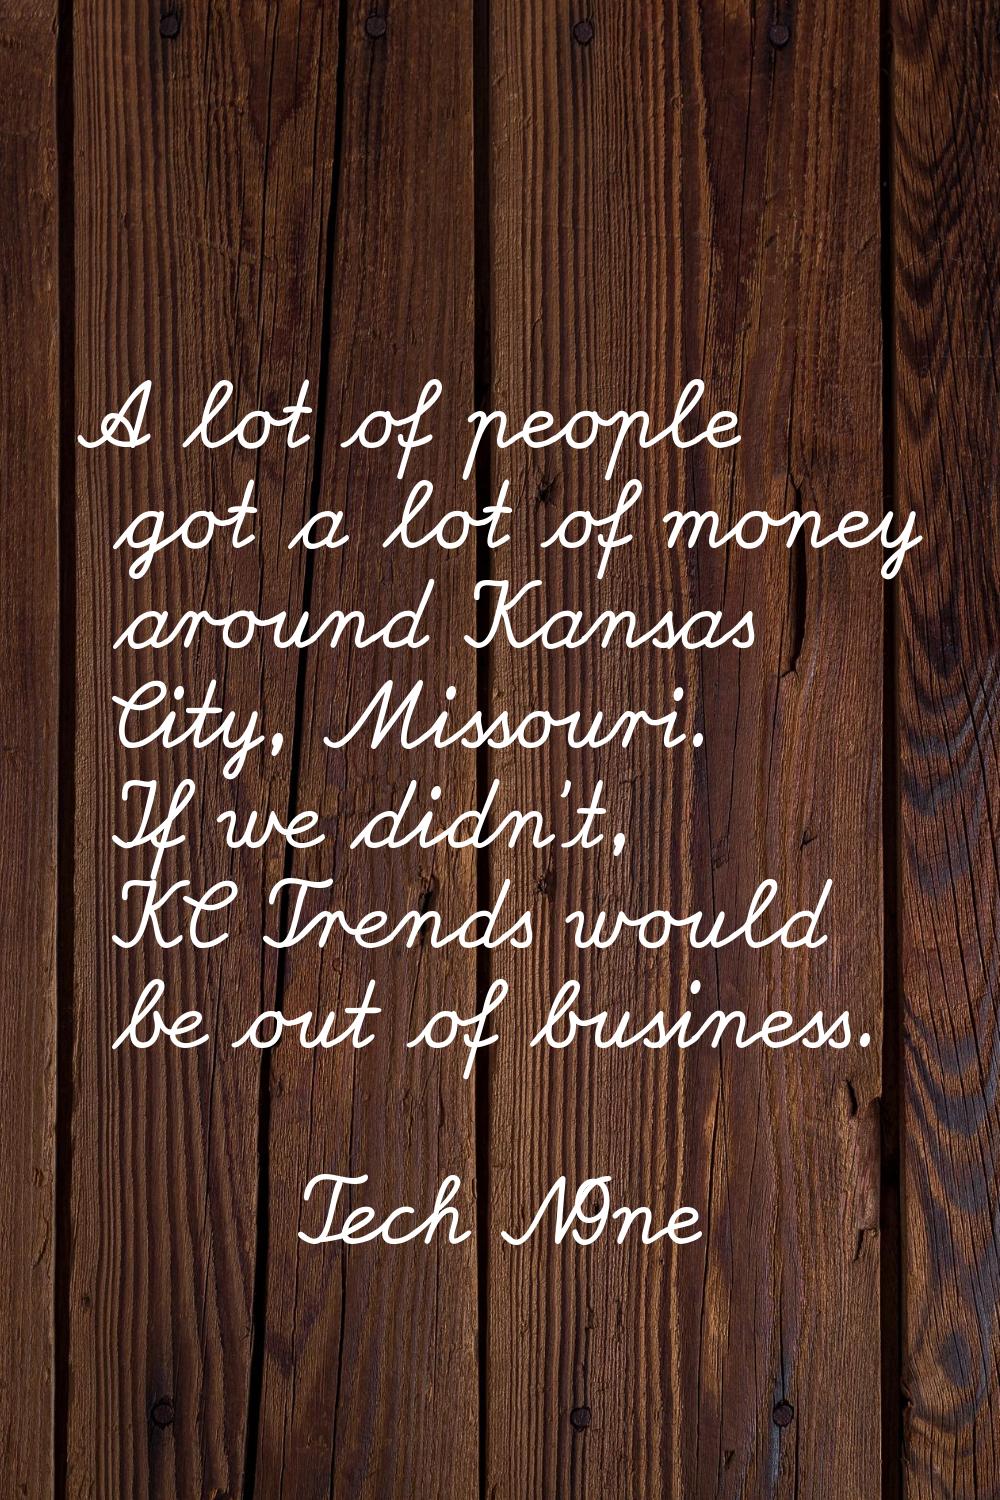 A lot of people got a lot of money around Kansas City, Missouri. If we didn't, KC Trends would be o